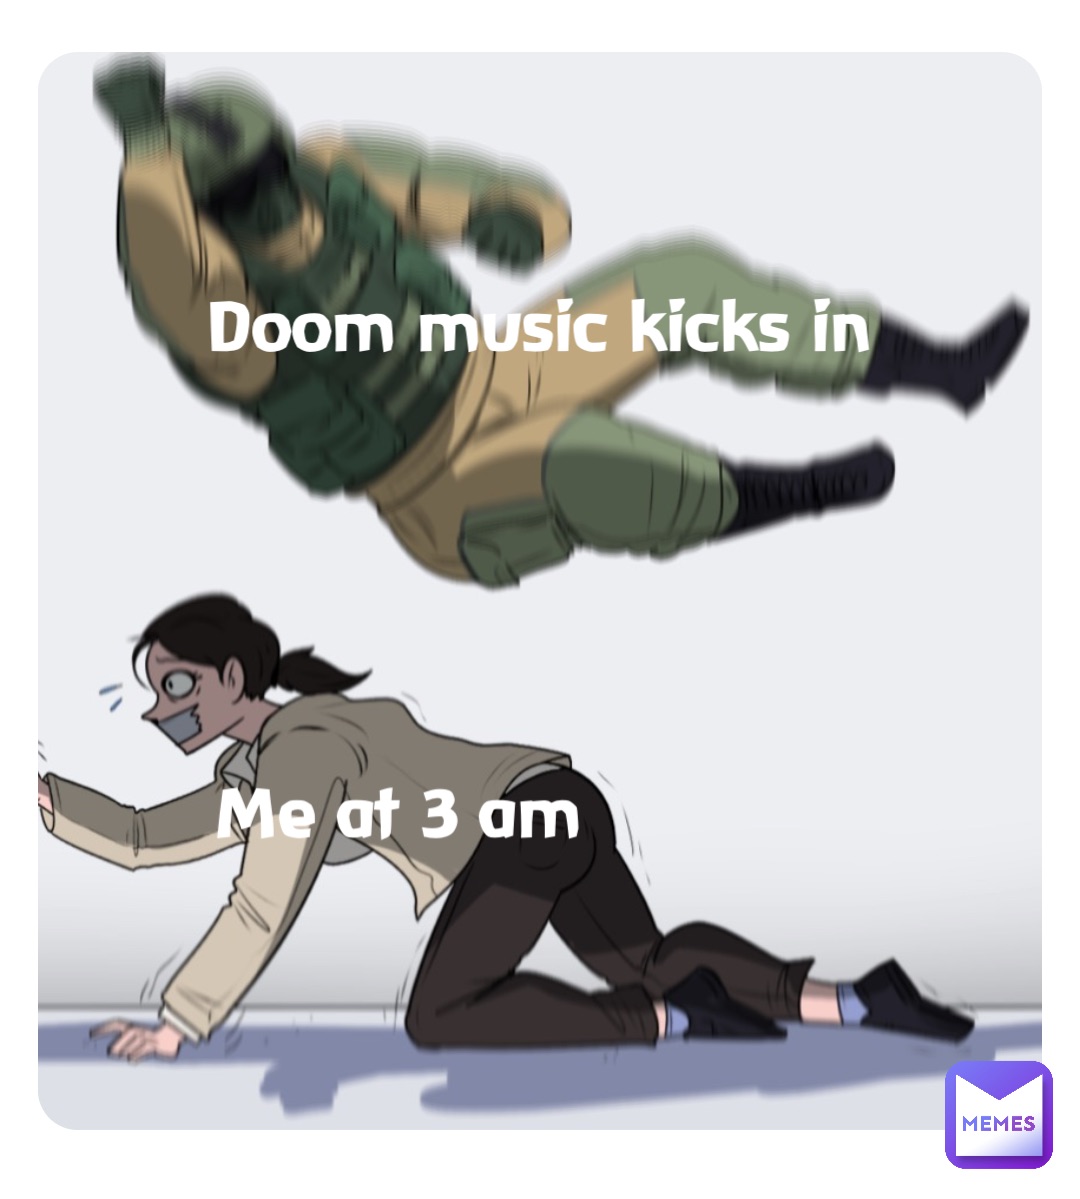 Double tap to edit Doom music kicks in Me at 3 am